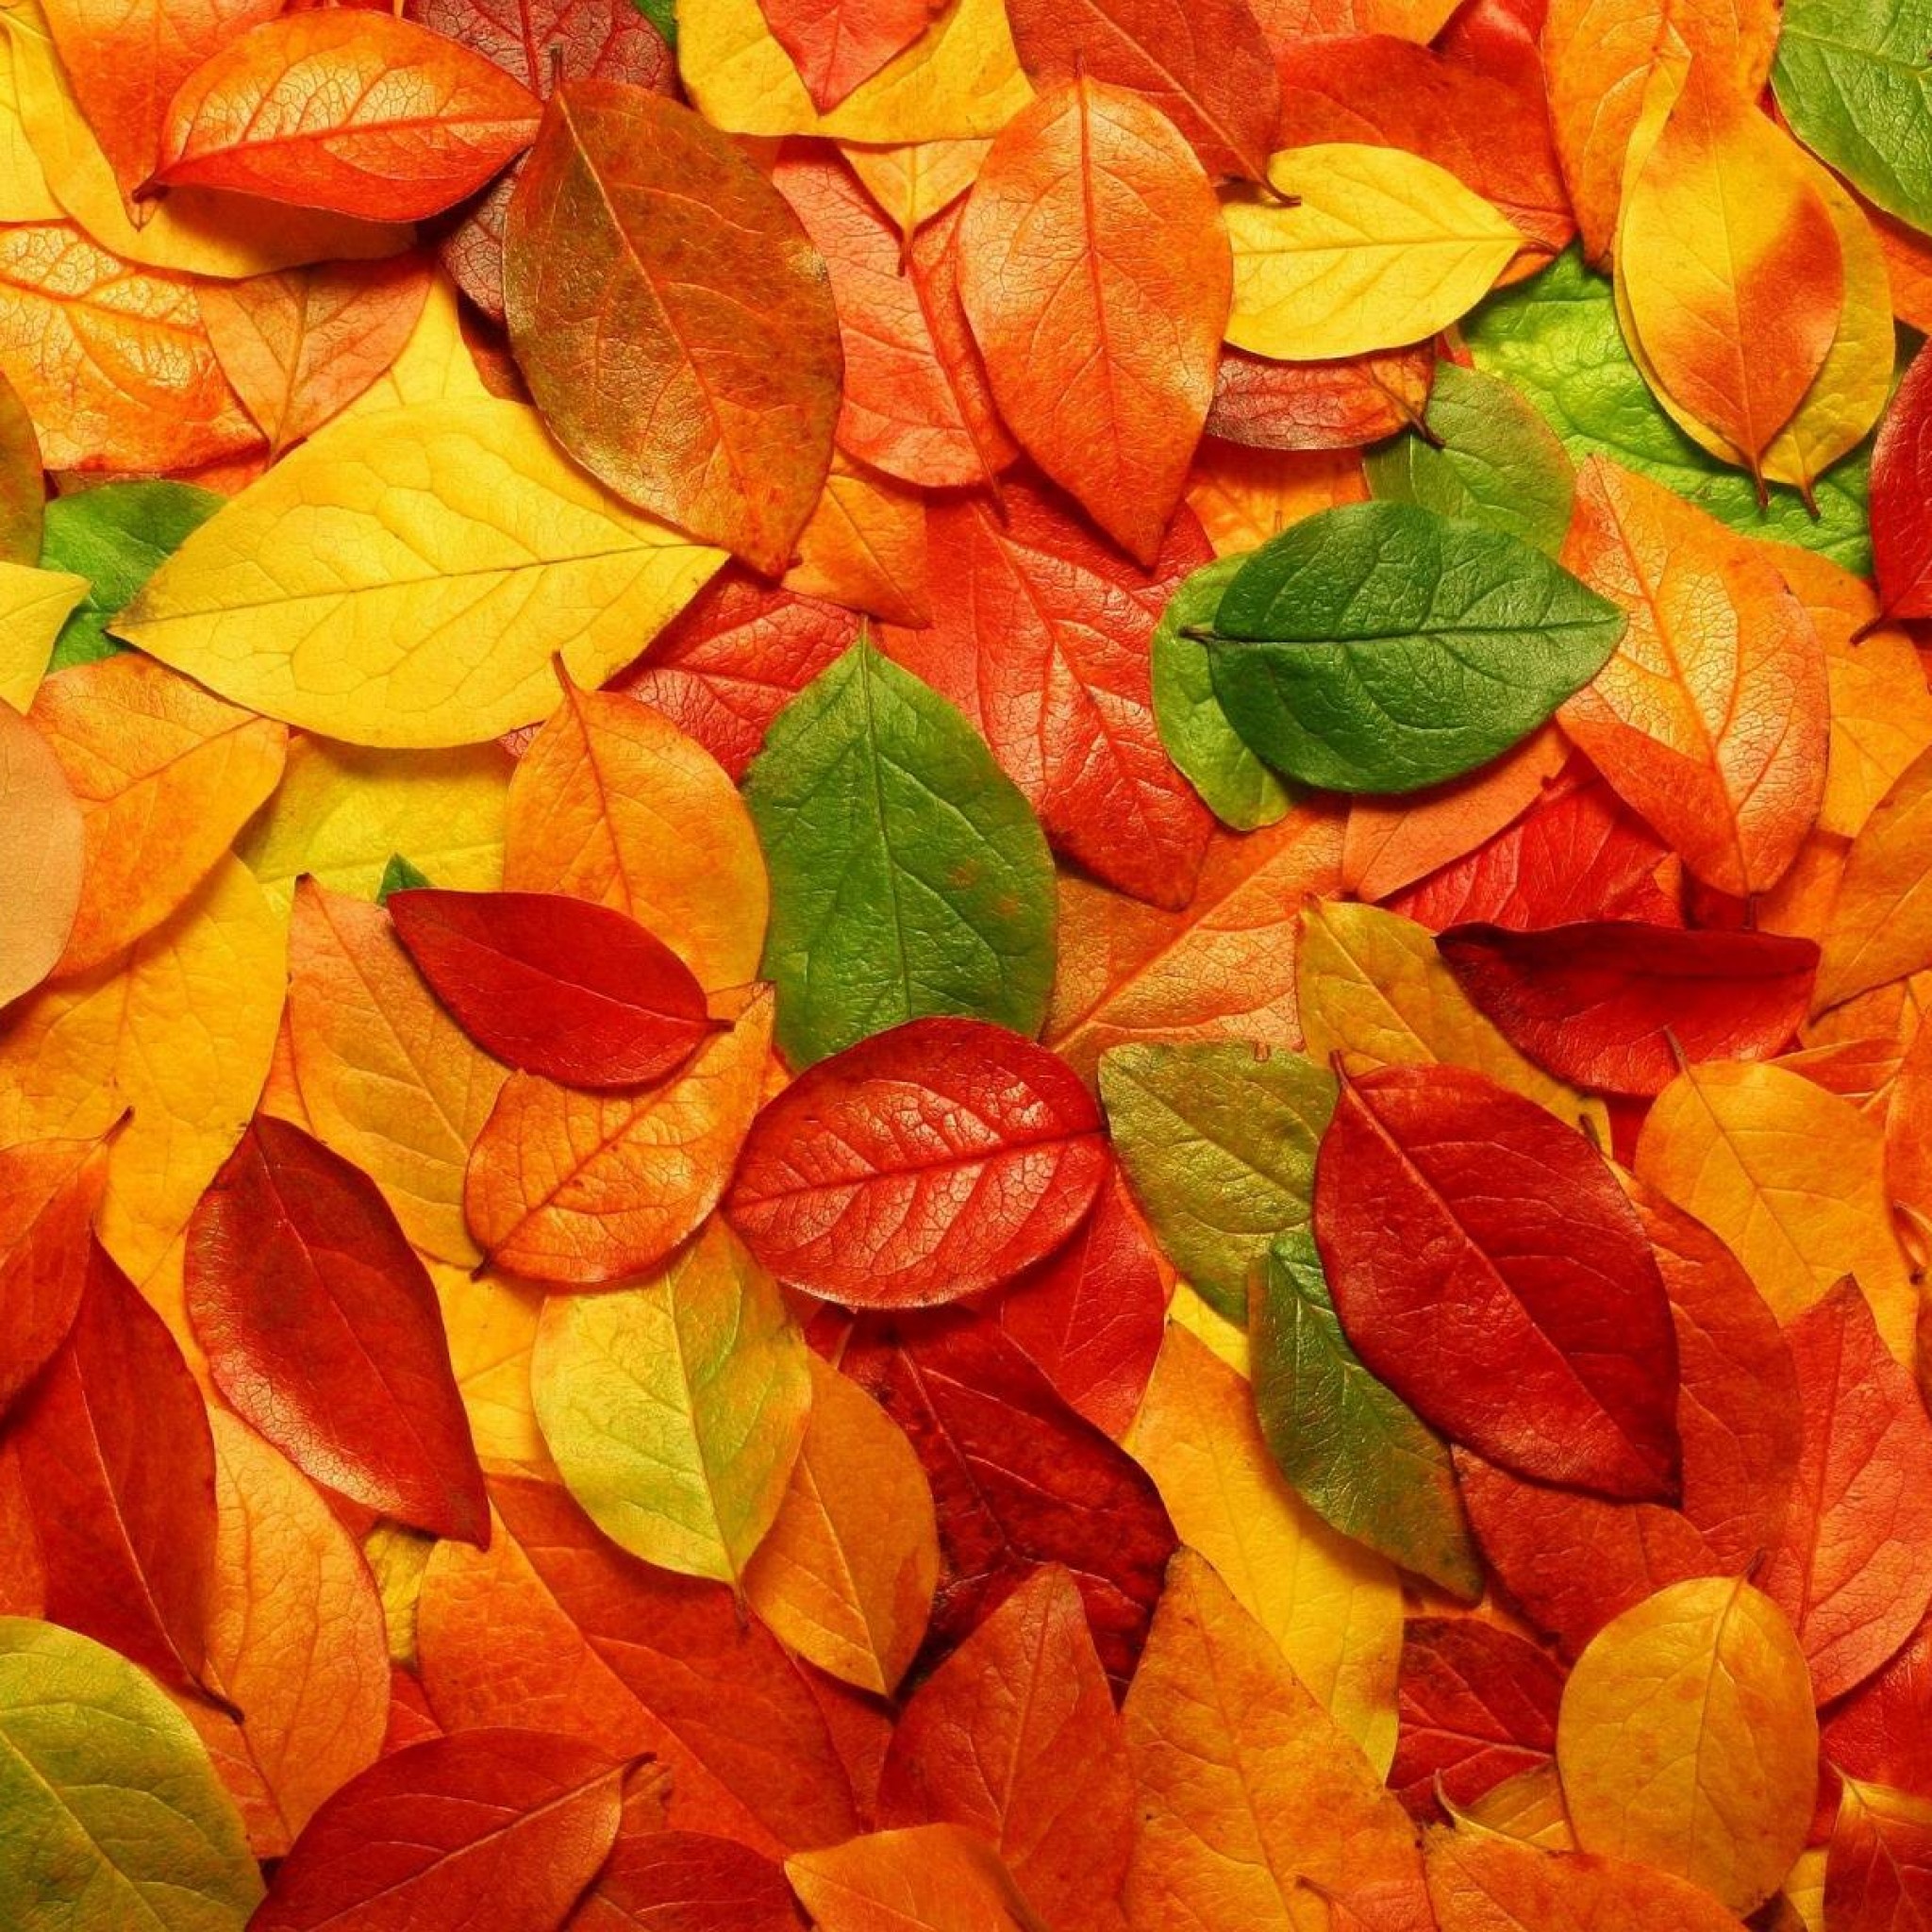 Wallpaper Weekends: Fall Leaves for iPad